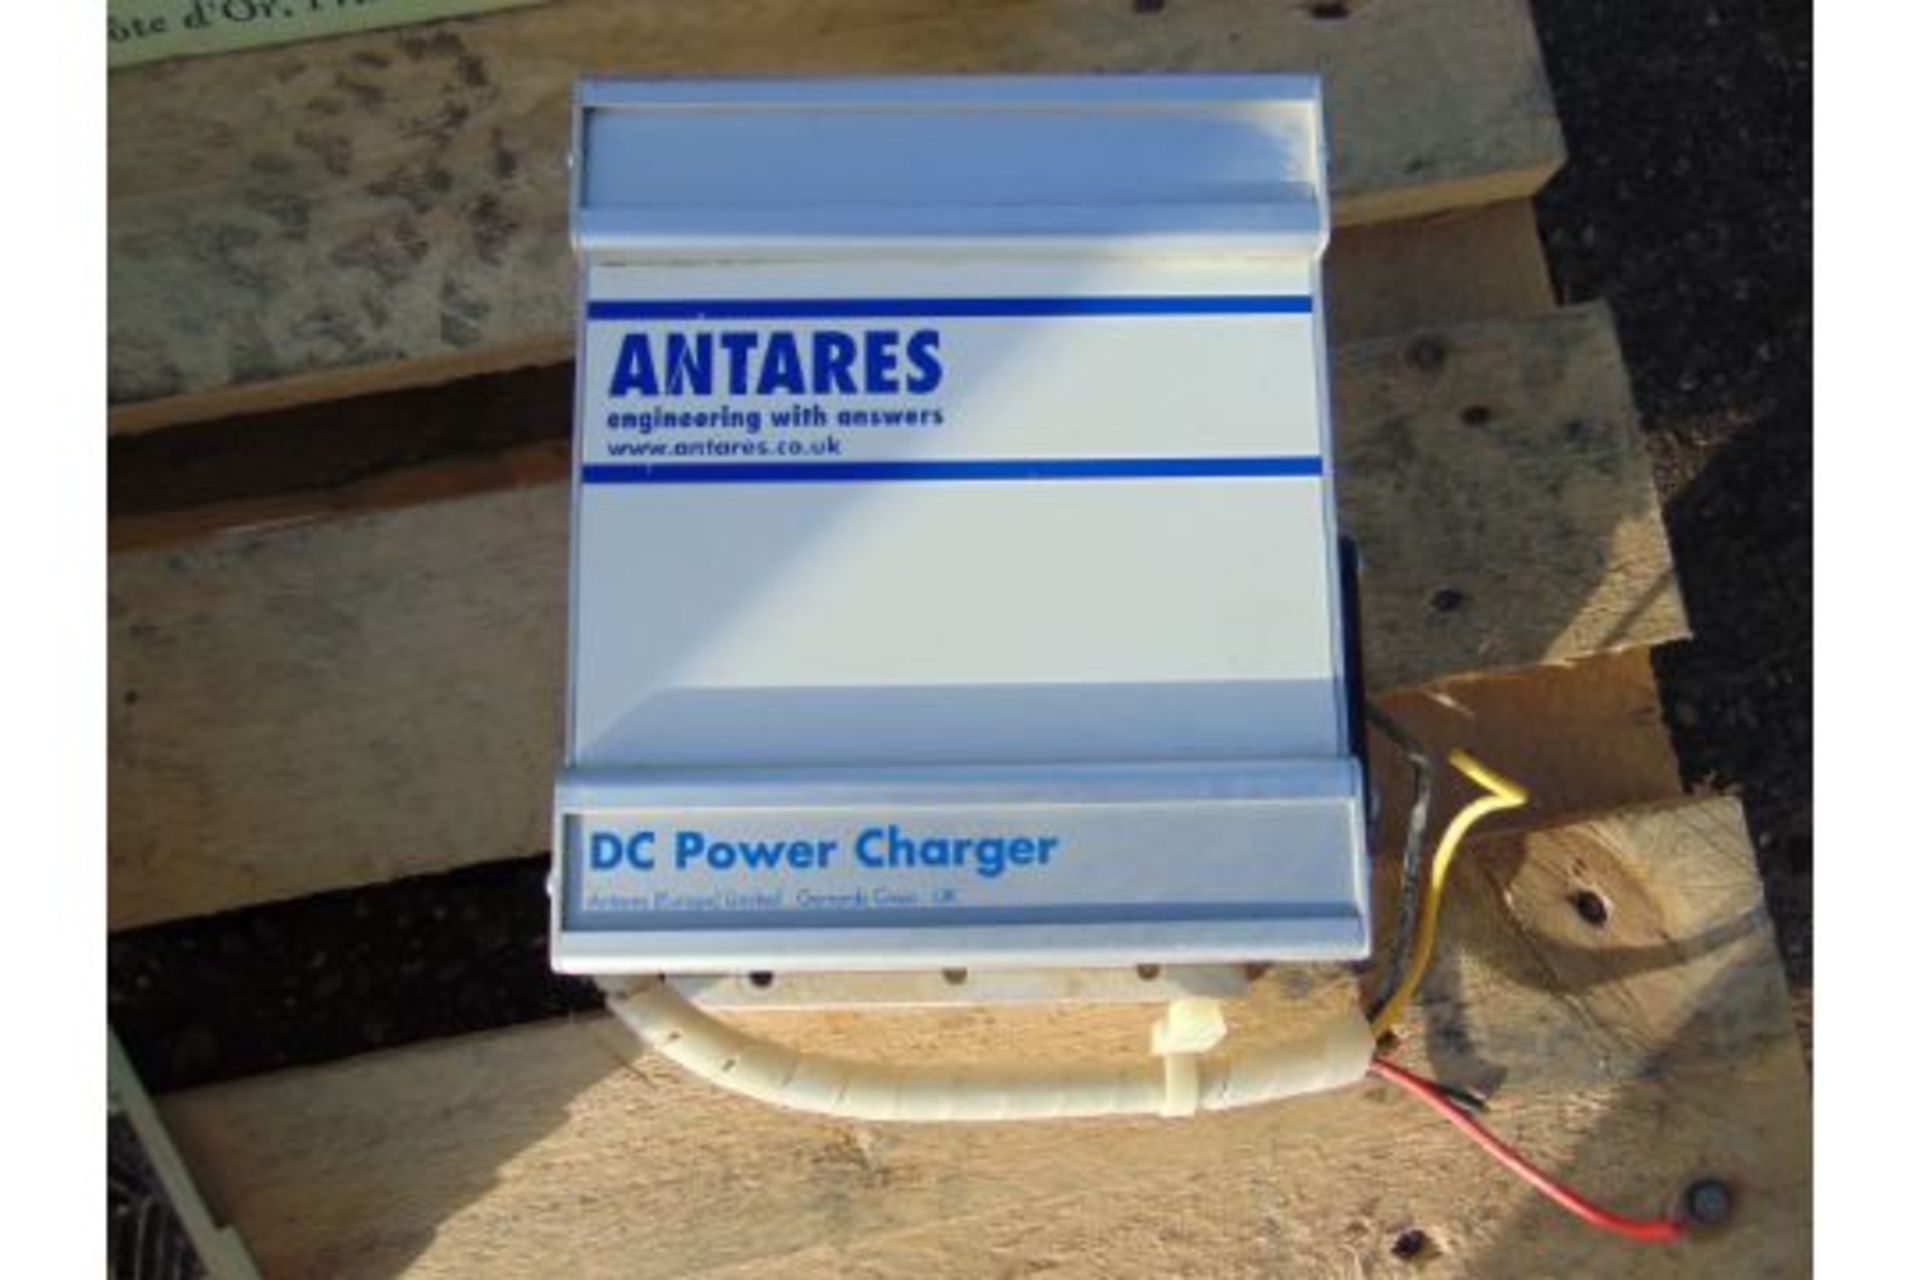 2X ANTARES DC POWER CHARGERS 24 VOLT - Image 4 of 4